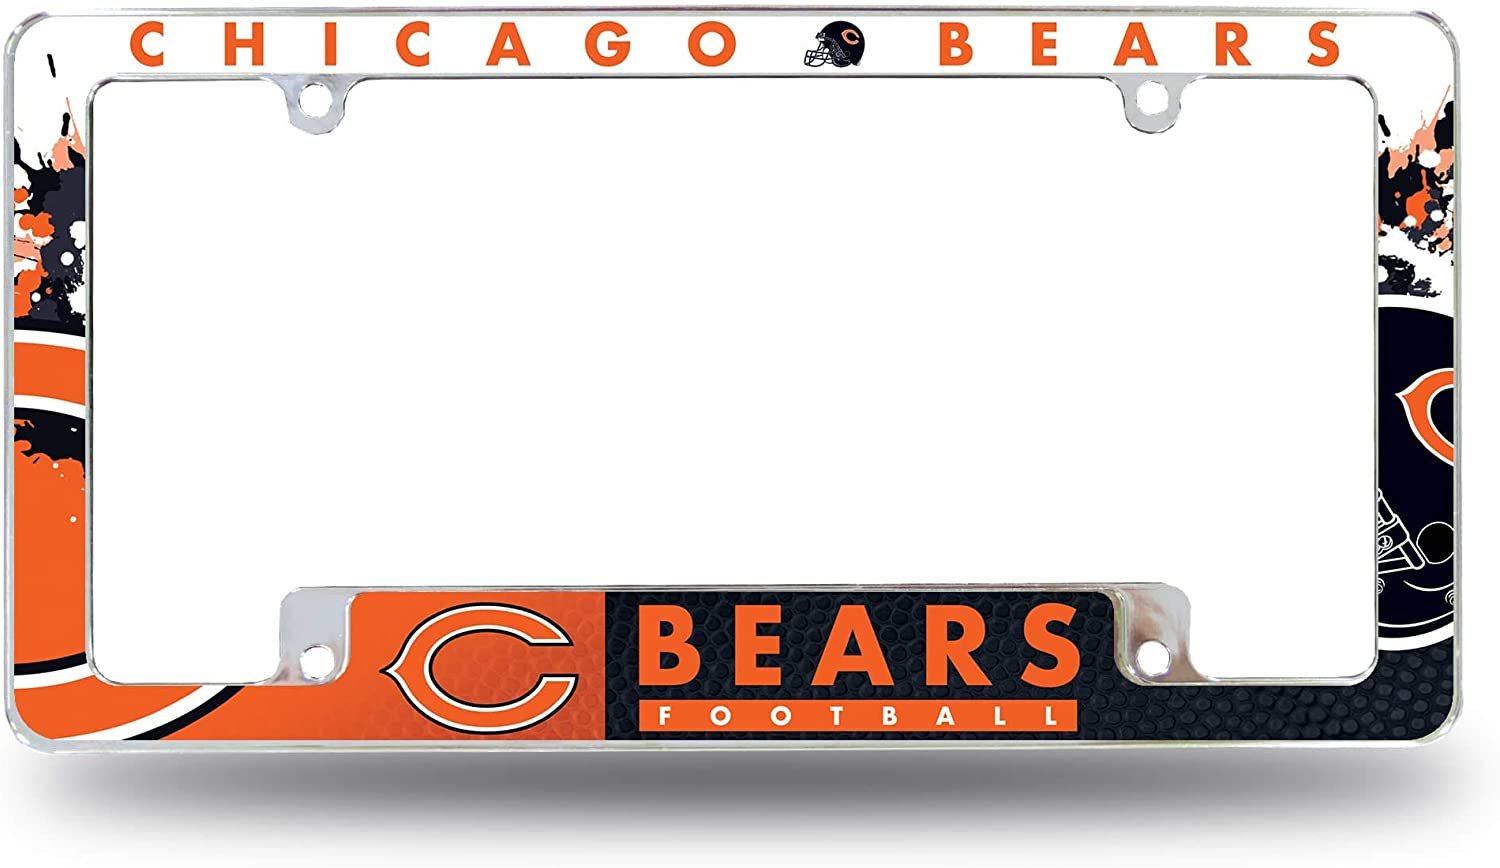 Chicago Bears Metal License License Plate Frame Tag Cover, All Over Design, 12x6 Inch